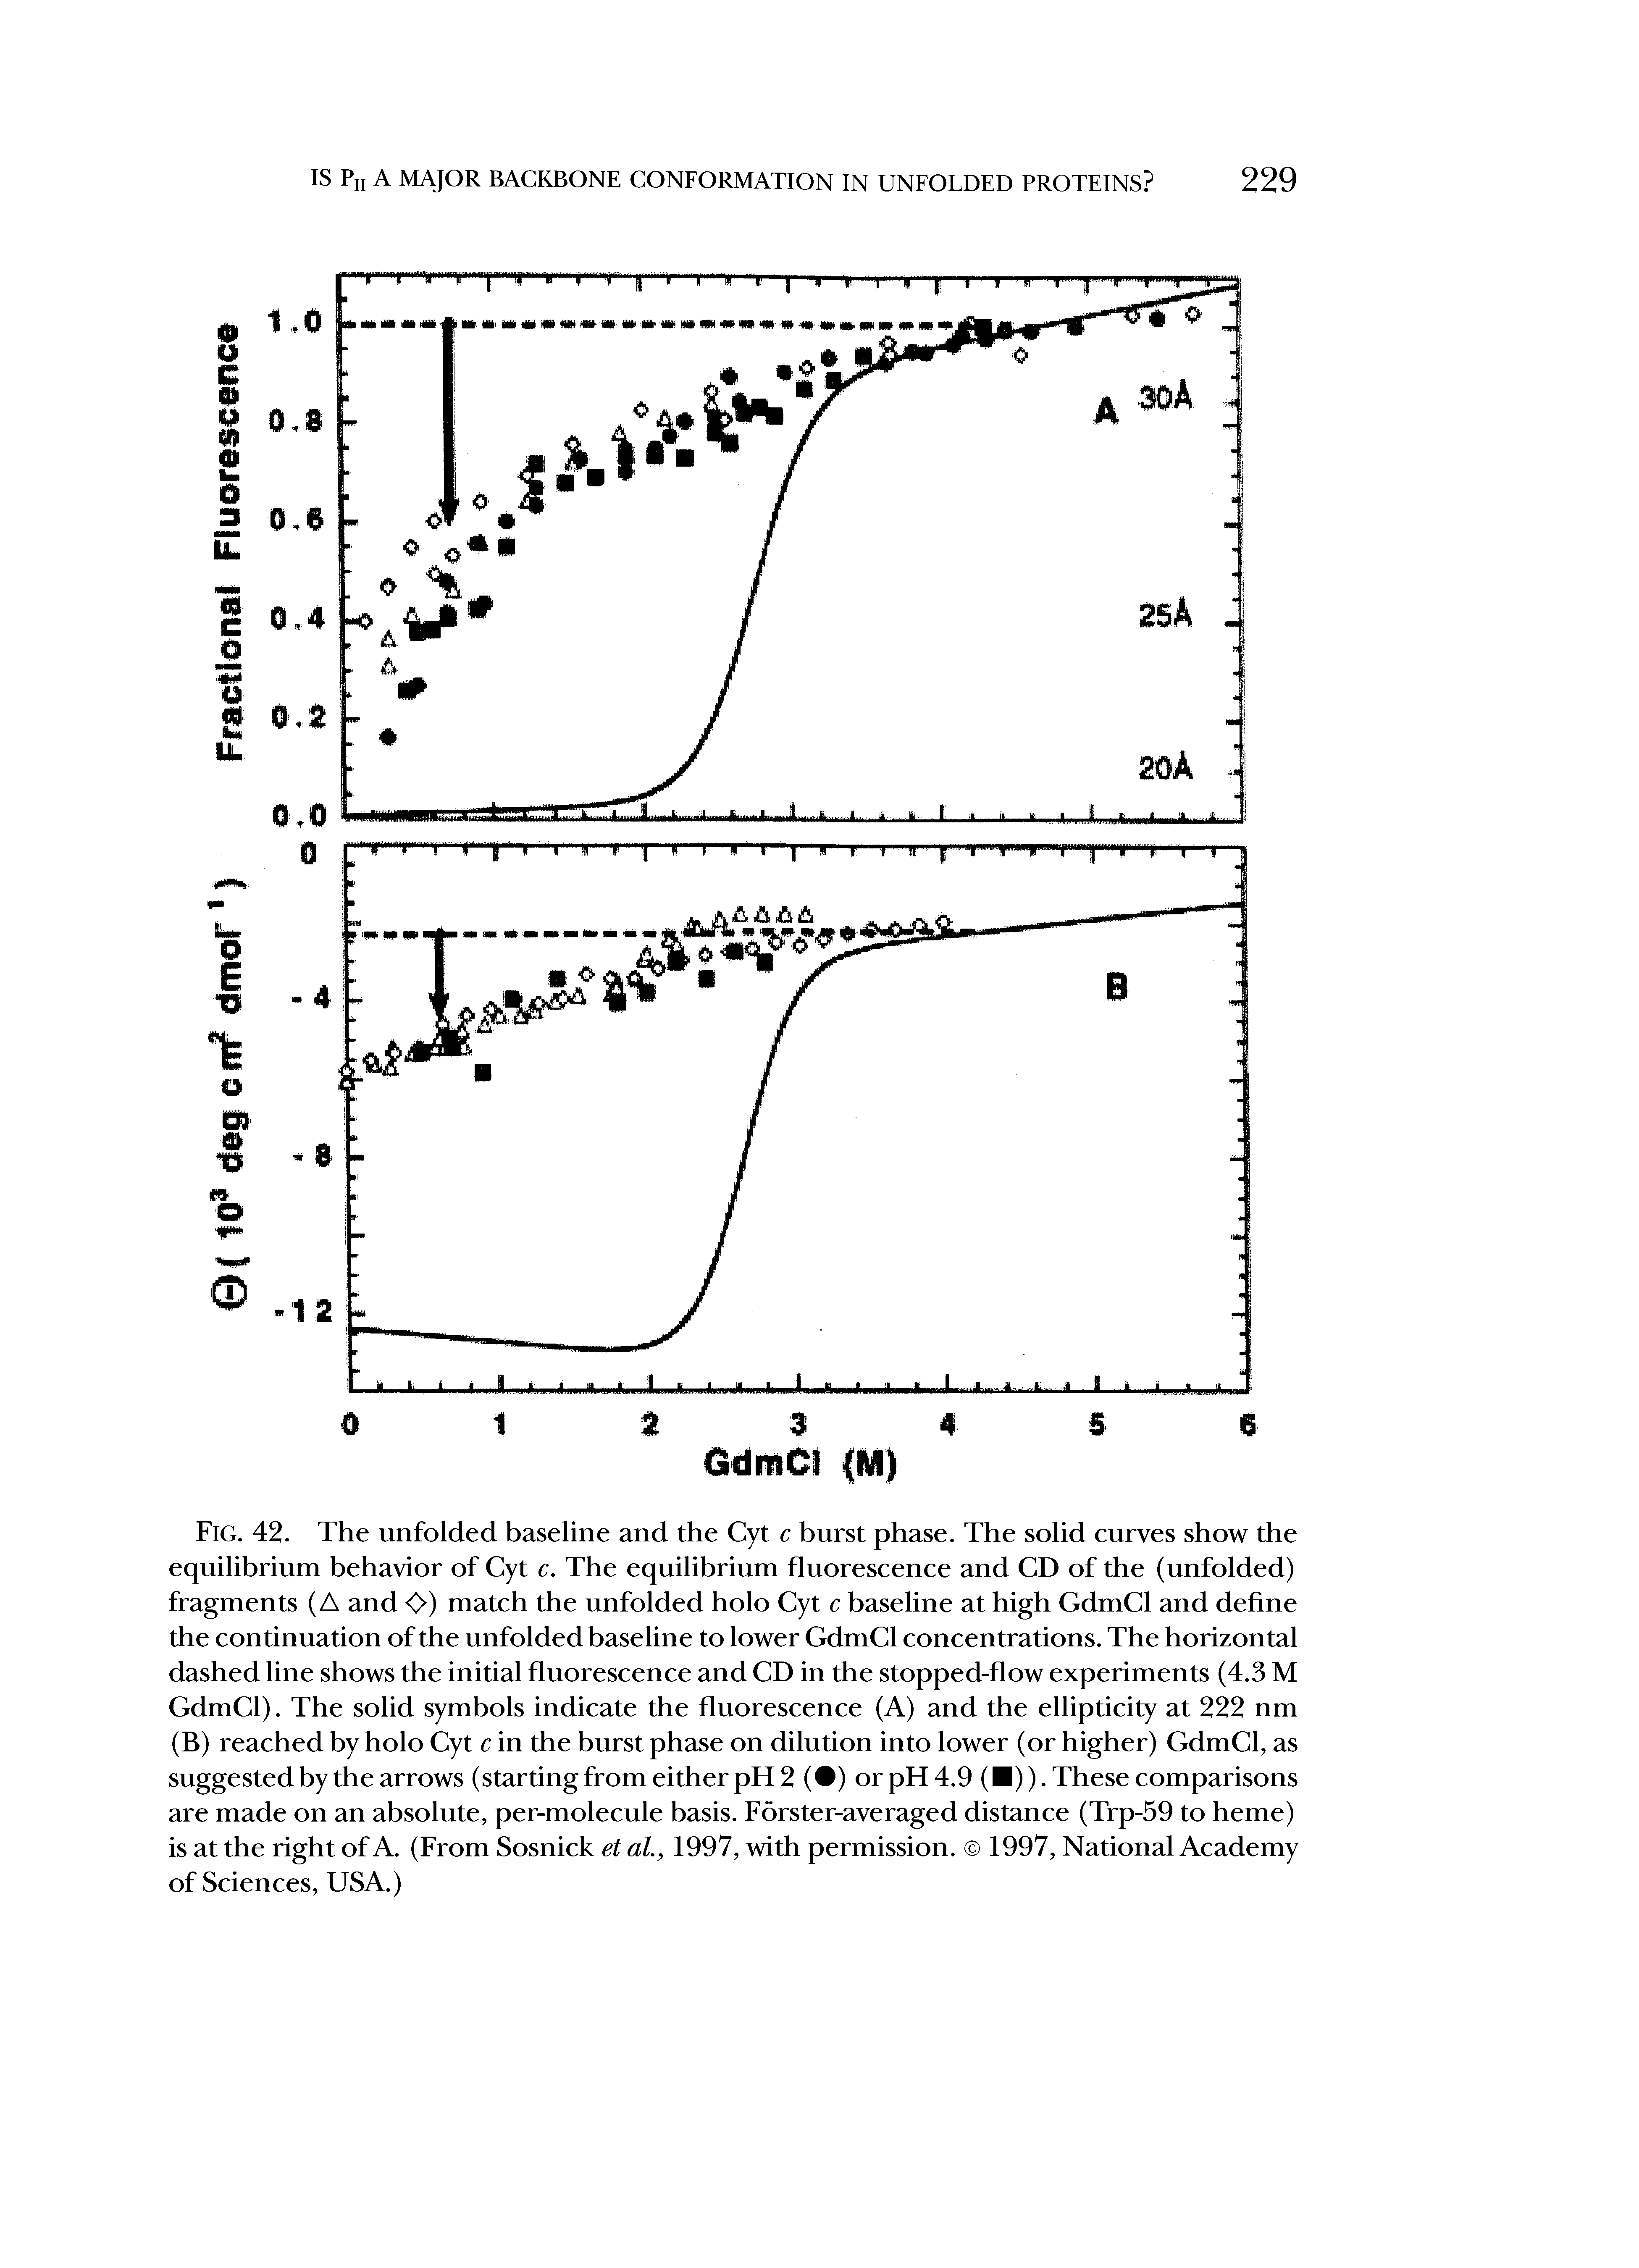 Fig. 42. The unfolded baseline and the Cyt c burst phase. The solid curves show the equilibrium behavior of Cyt c. The equilibrium fluorescence and CD of the (unfolded) fragments (A and <>) match the unfolded holo Cyt c baseline at high GdmCl and define the continuation of the unfolded baseline to lower GdmCl concentrations. The horizontal dashed line shows the initial fluorescence and CD in the stopped-flow experiments (4.3 M GdmCl). The solid symbols indicate the fluorescence (A) and the ellipticity at 222 nm (B) reached by holo Cyt c in the burst phase on dilution into lower (or higher) GdmCl, as suggested by the arrows (starting from either pH 2 ( ) or pH 4.9 ( )). These comparisons are made on an absolute, per-molecule basis. Forster-averaged distance (Trp-59 to heme) is at the right of A. (From Sosnick et al., 1997, with permission. 1997, National Academy of Sciences, USA.)...